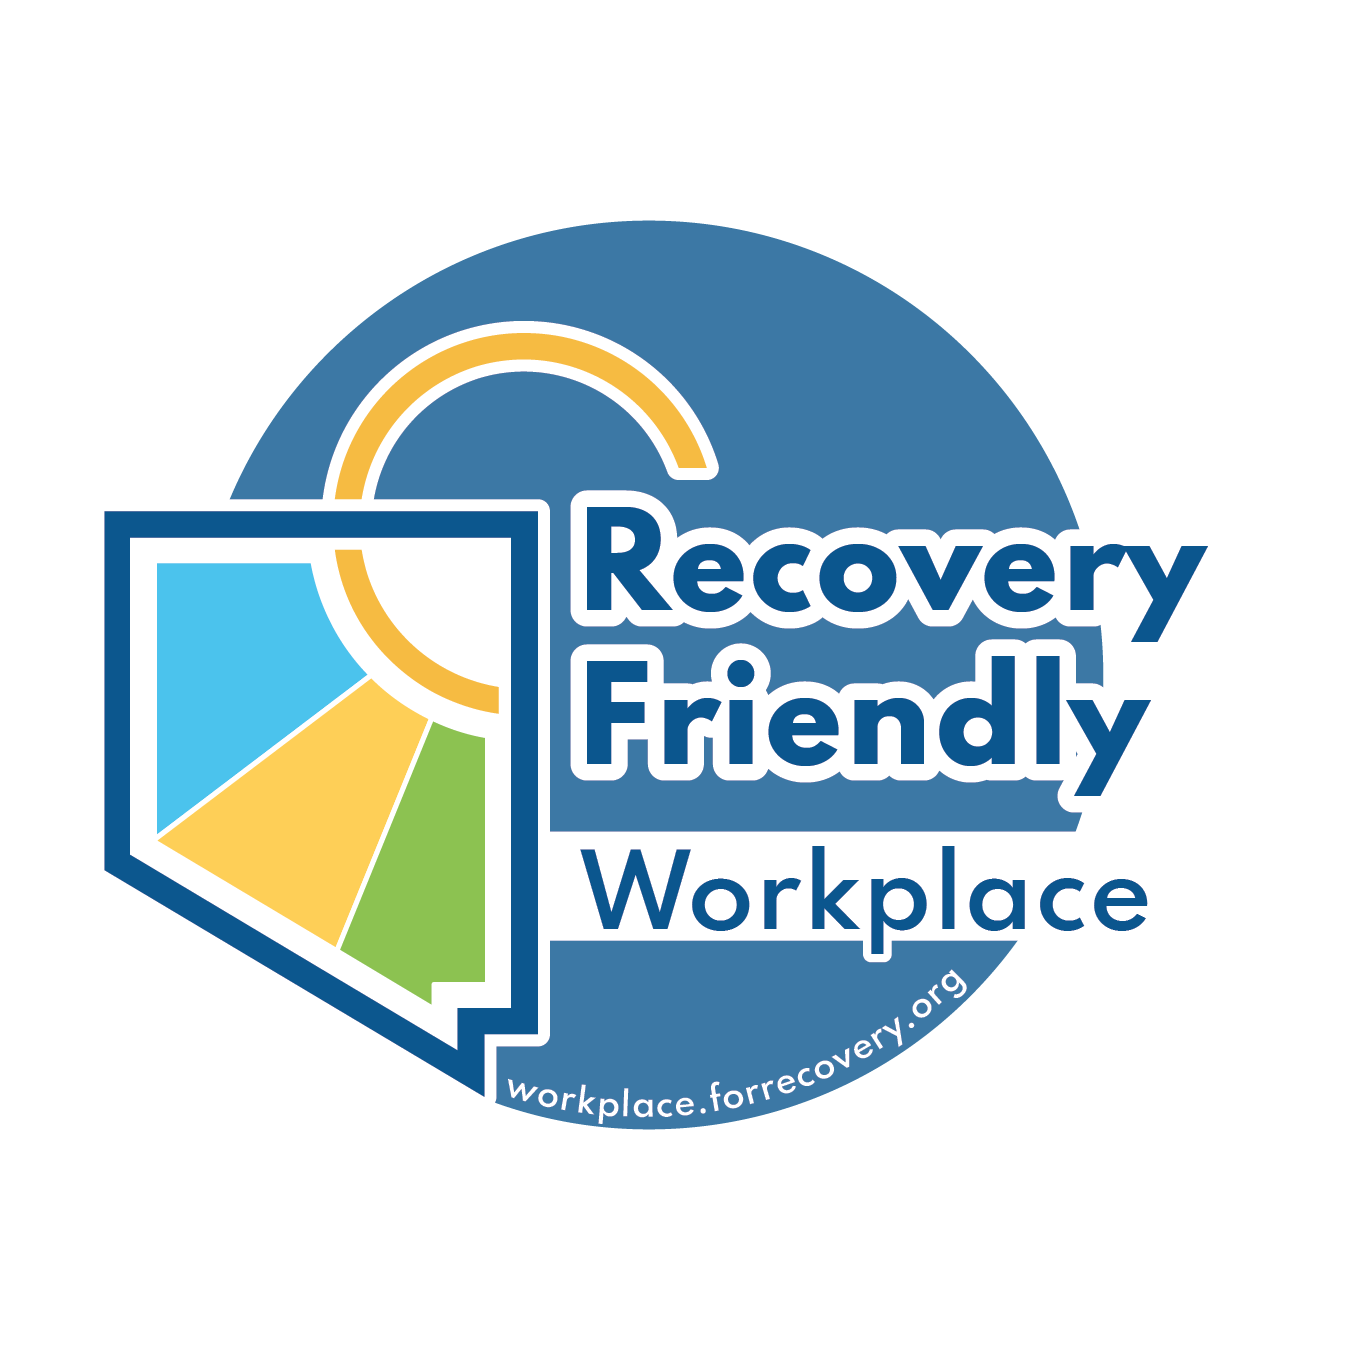 Recovery Friendly Workplace badge. Blue seal with shape of Nevada and a ray of sunshine coming out of it "Recovery Friendly Workplace" written out